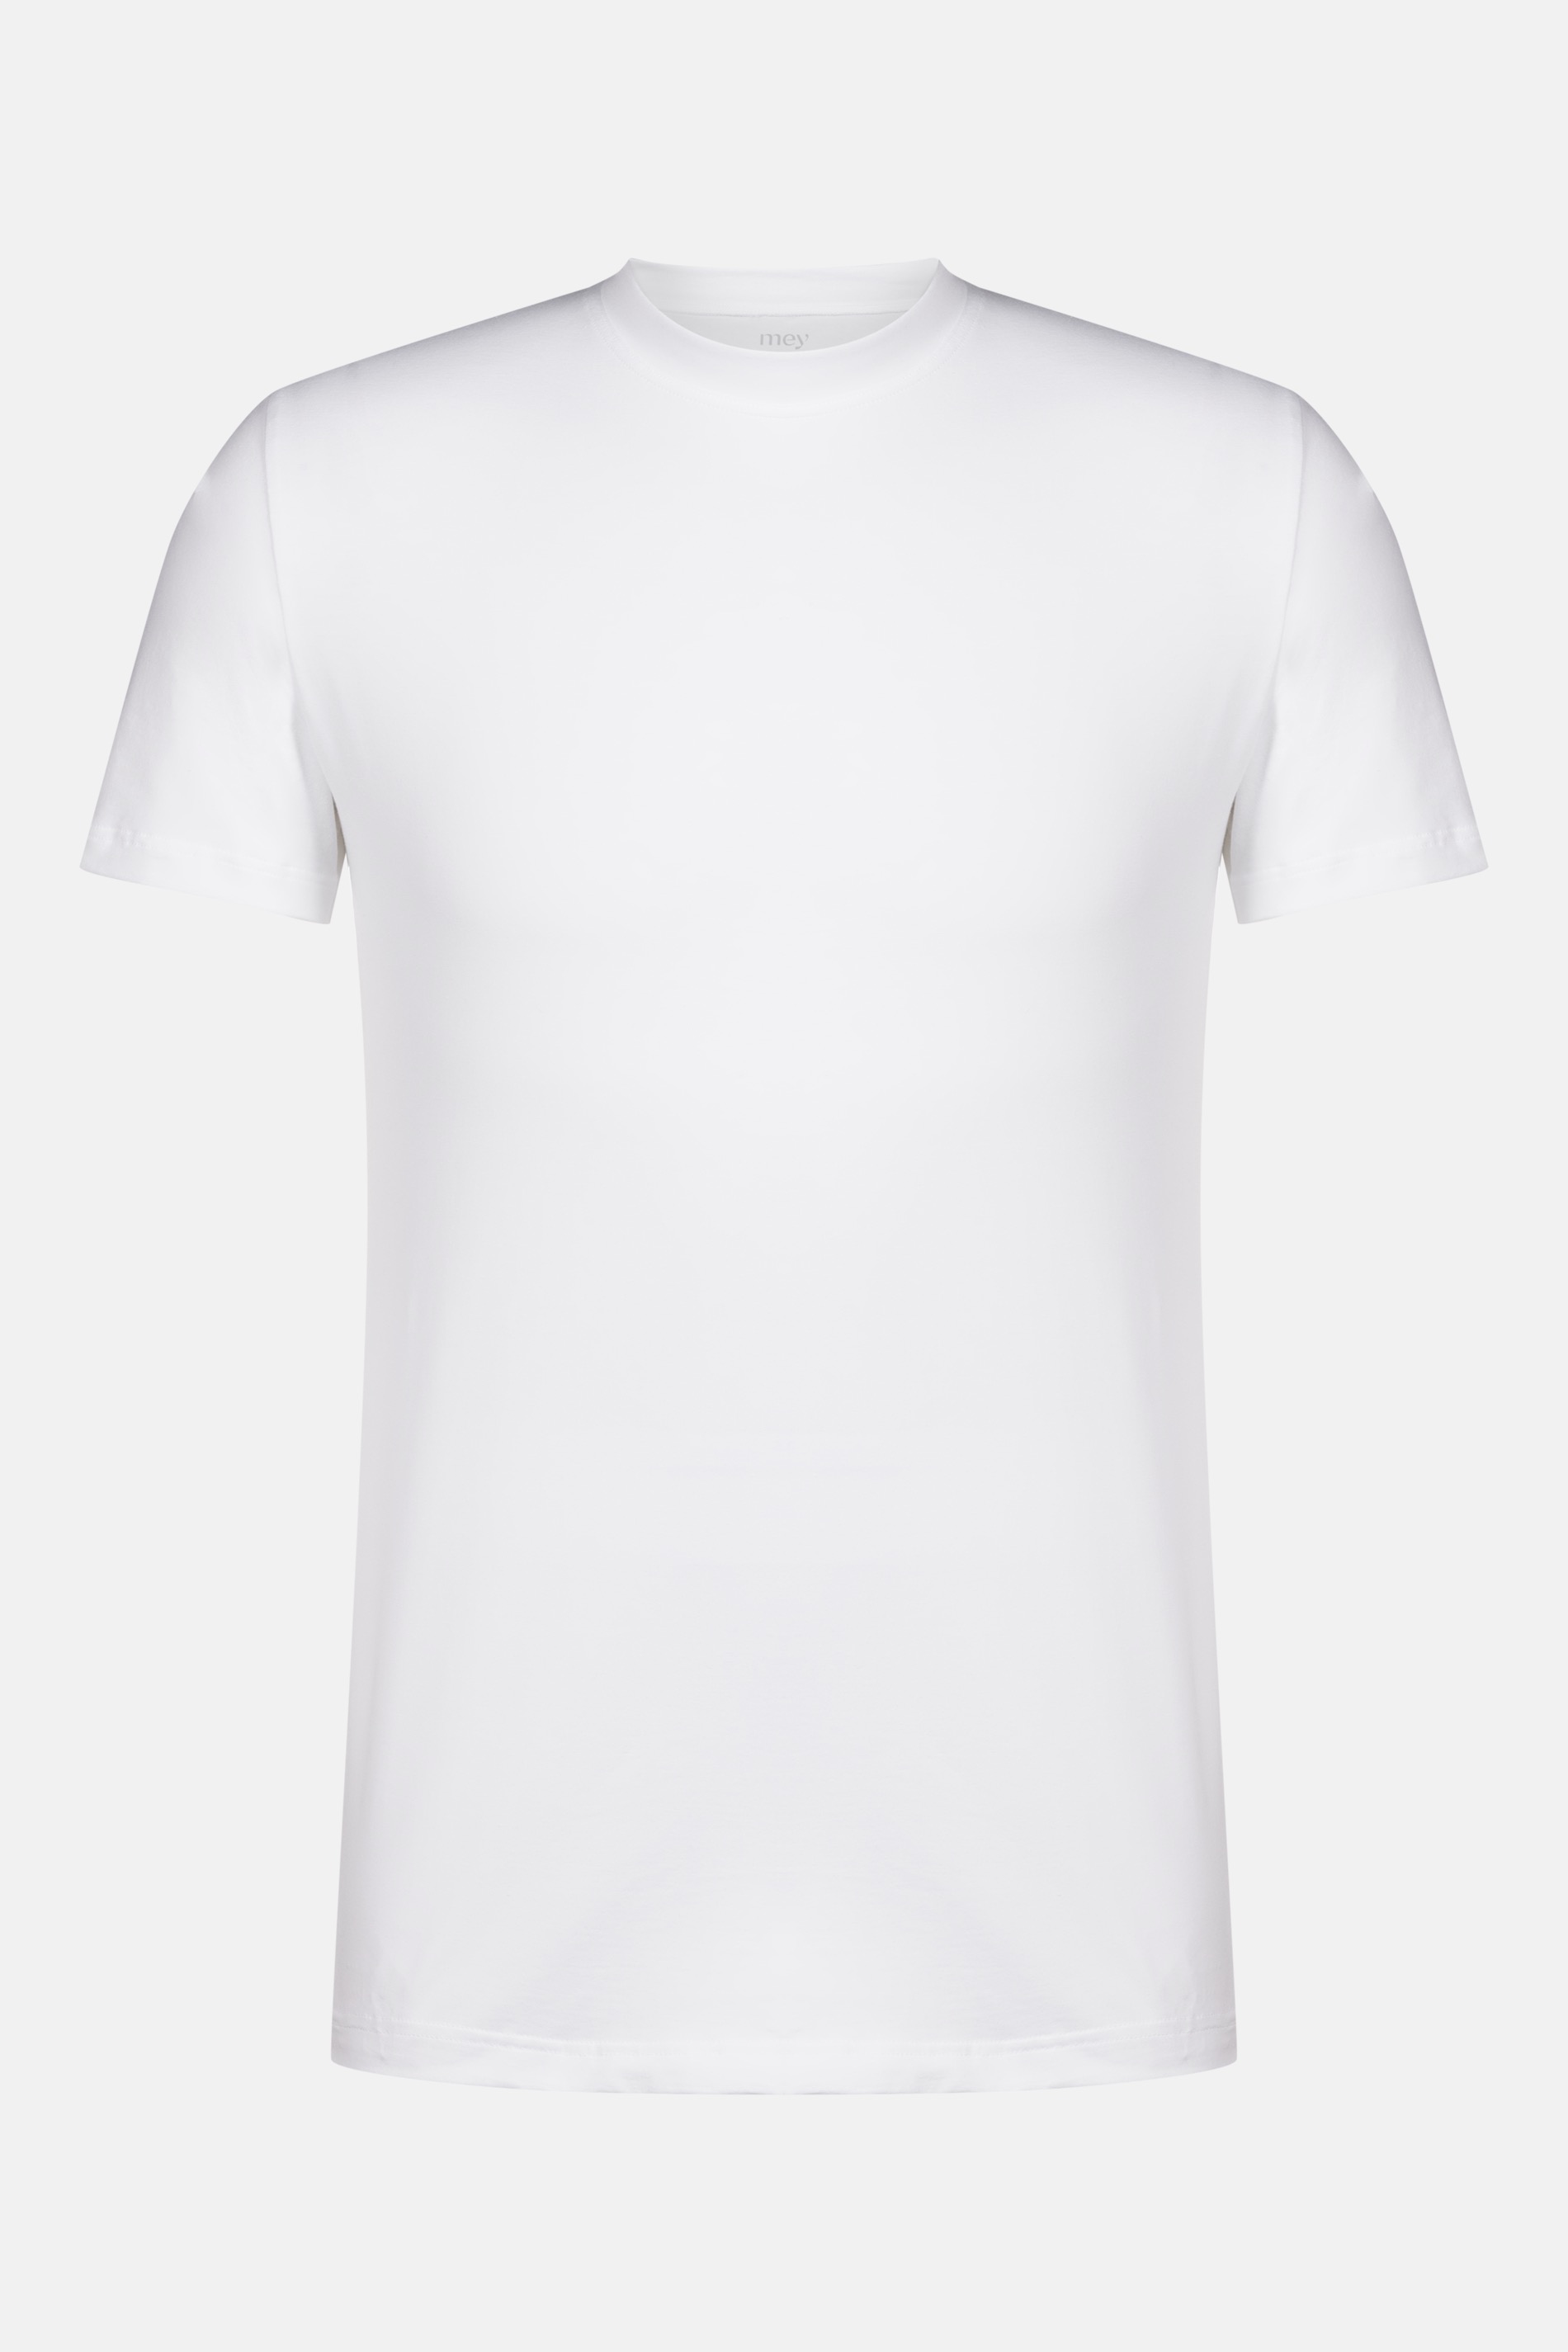 Olympic shirt White Serie Dry Cotton Cut Out | mey®